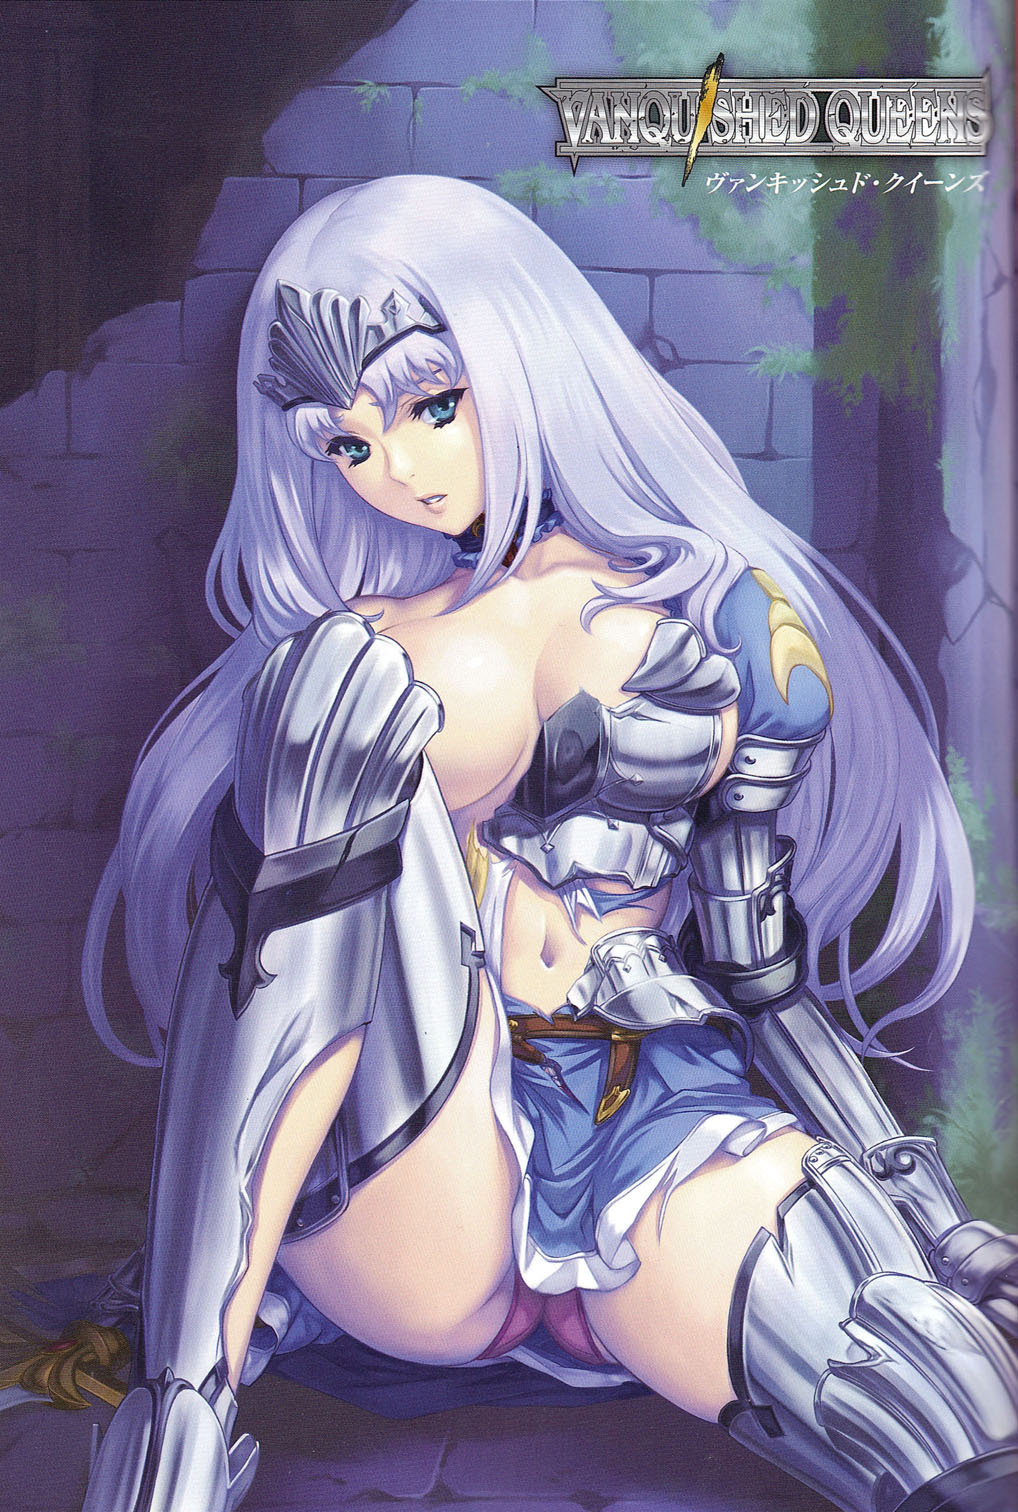 [Various] Vanquished Queens Visual Book (Queen's Blade) [English] [leecherboy] page 2 full